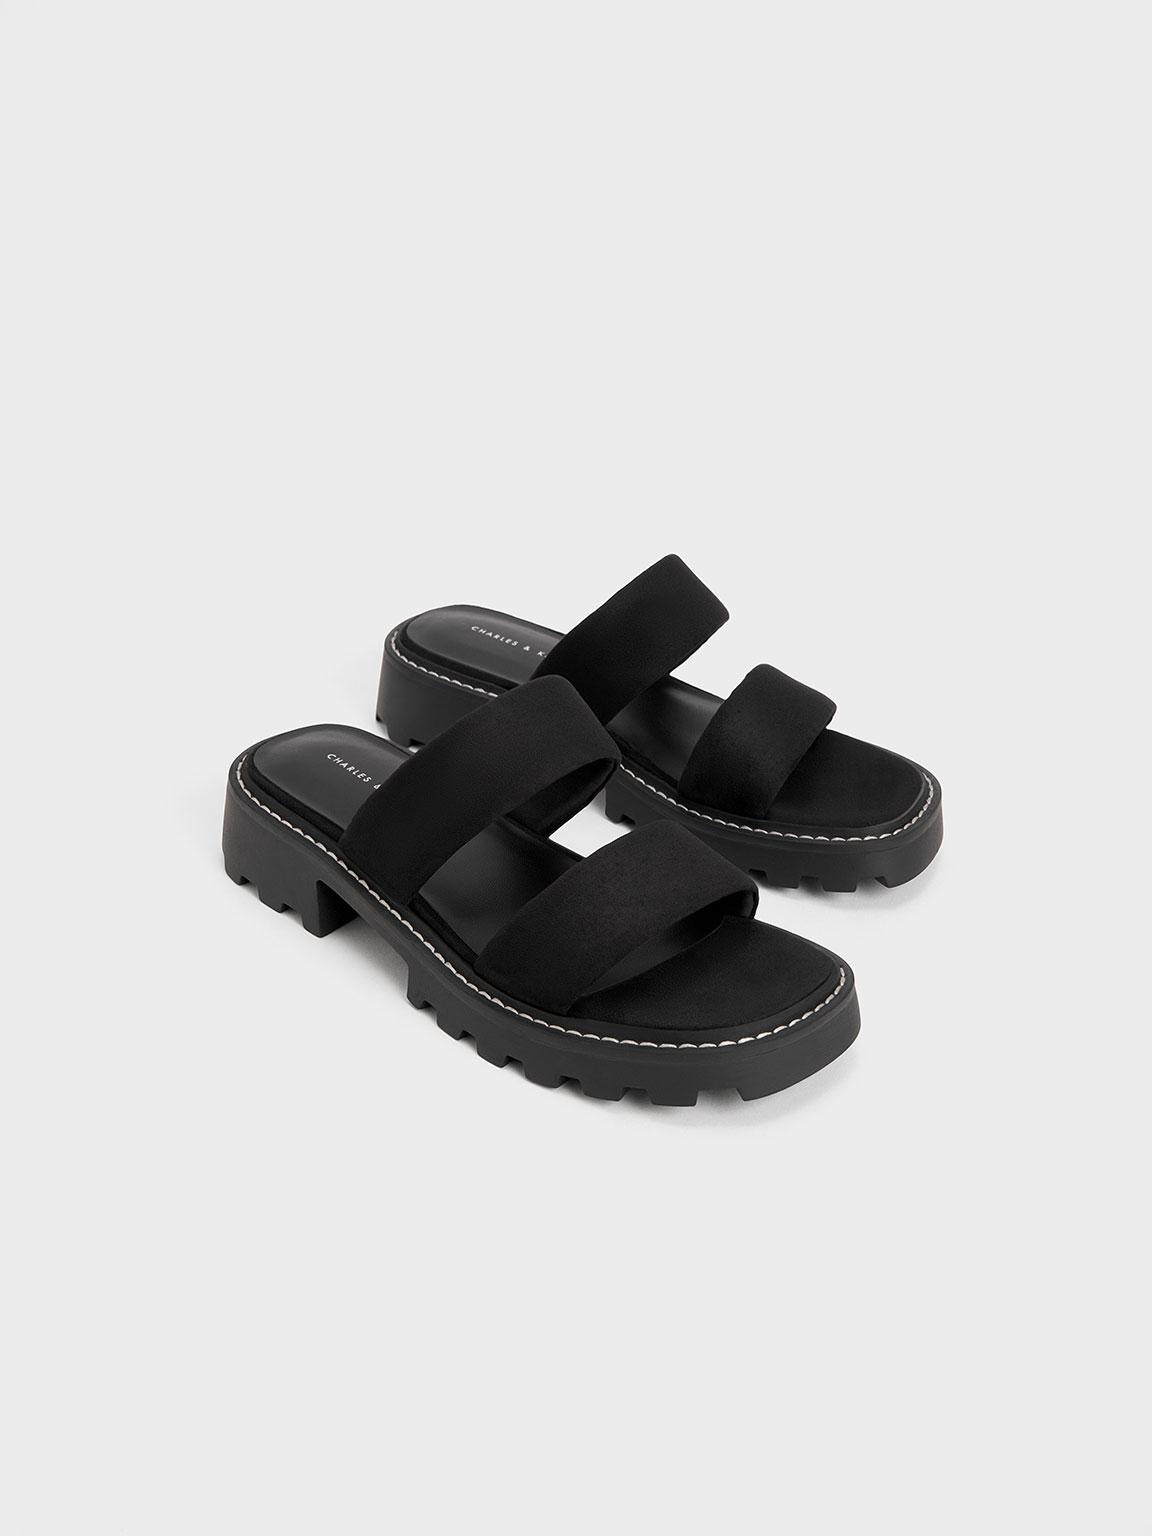 Charles & Keith Padded Double Strap Sliders in Black | Lyst